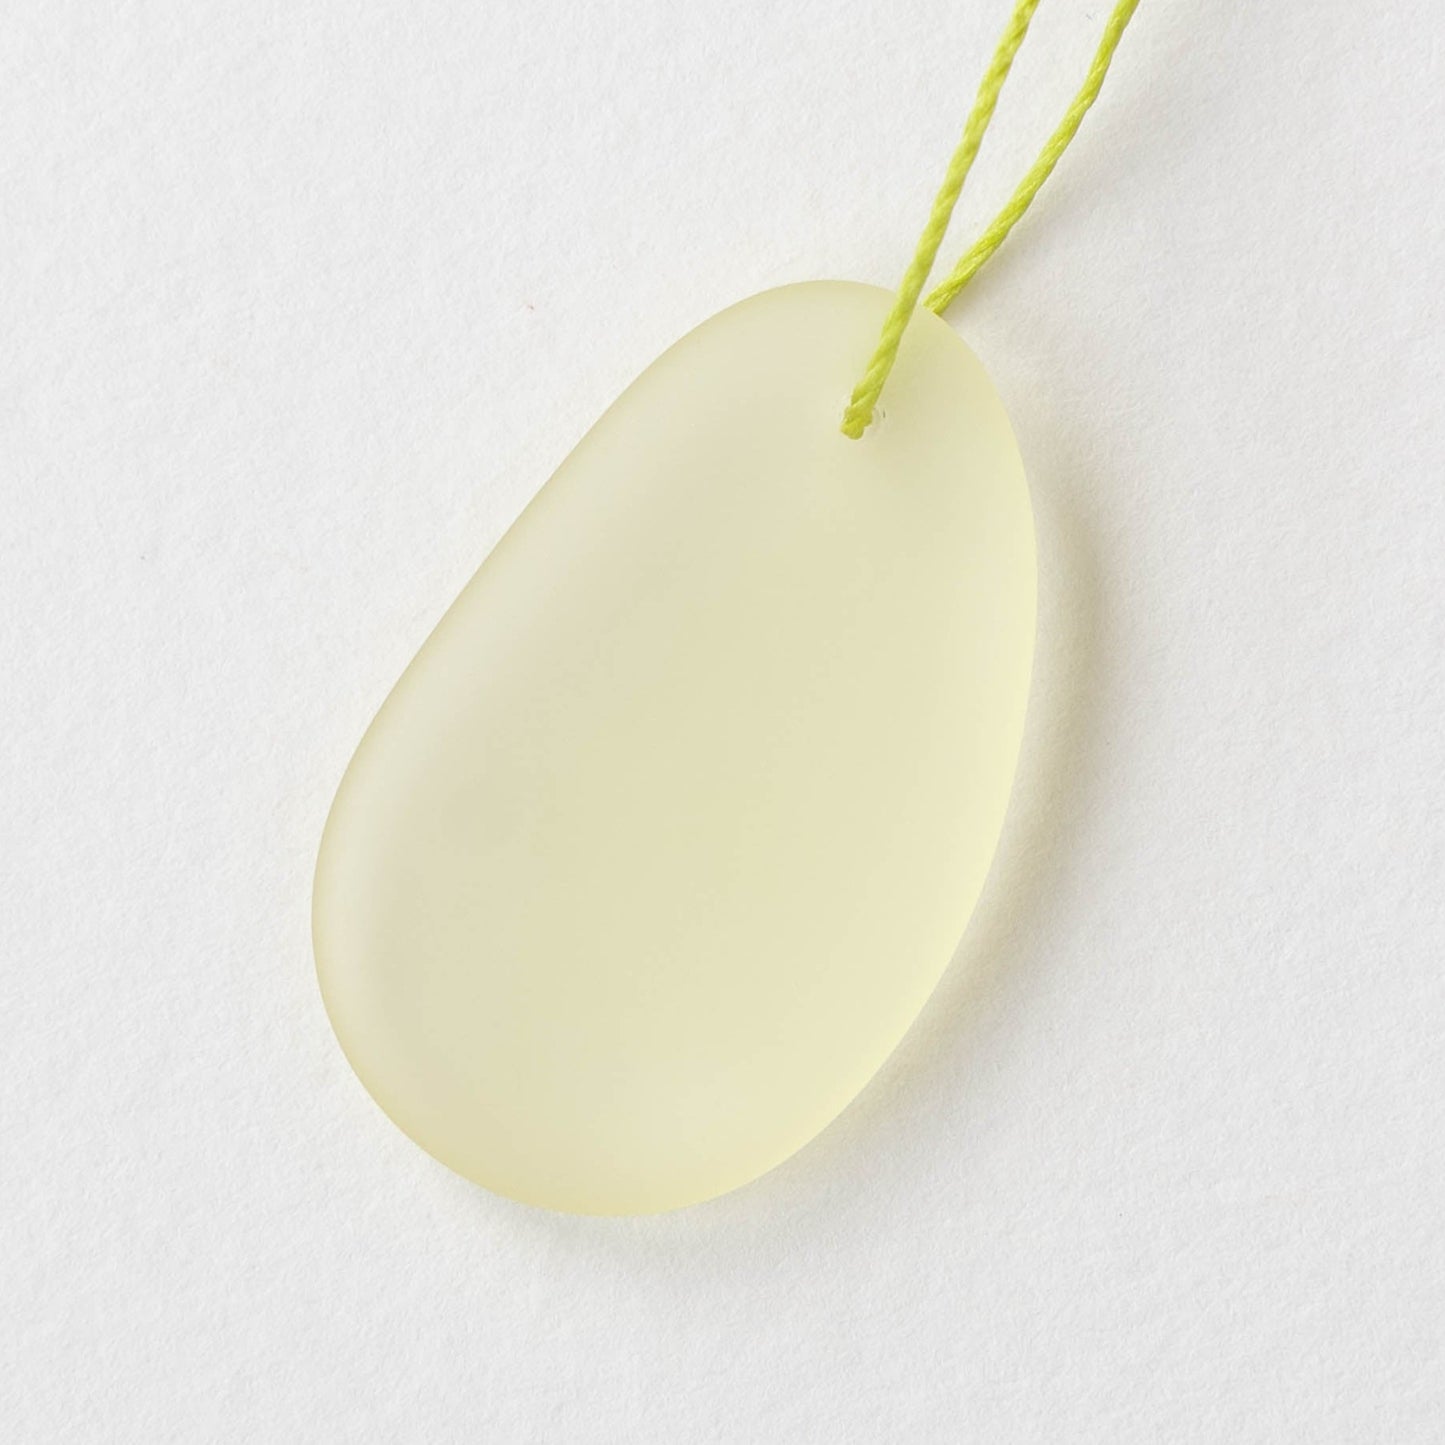 20x32mm Frosted Glass Pendants - Chiffon Yellow - 2, 4 or 10